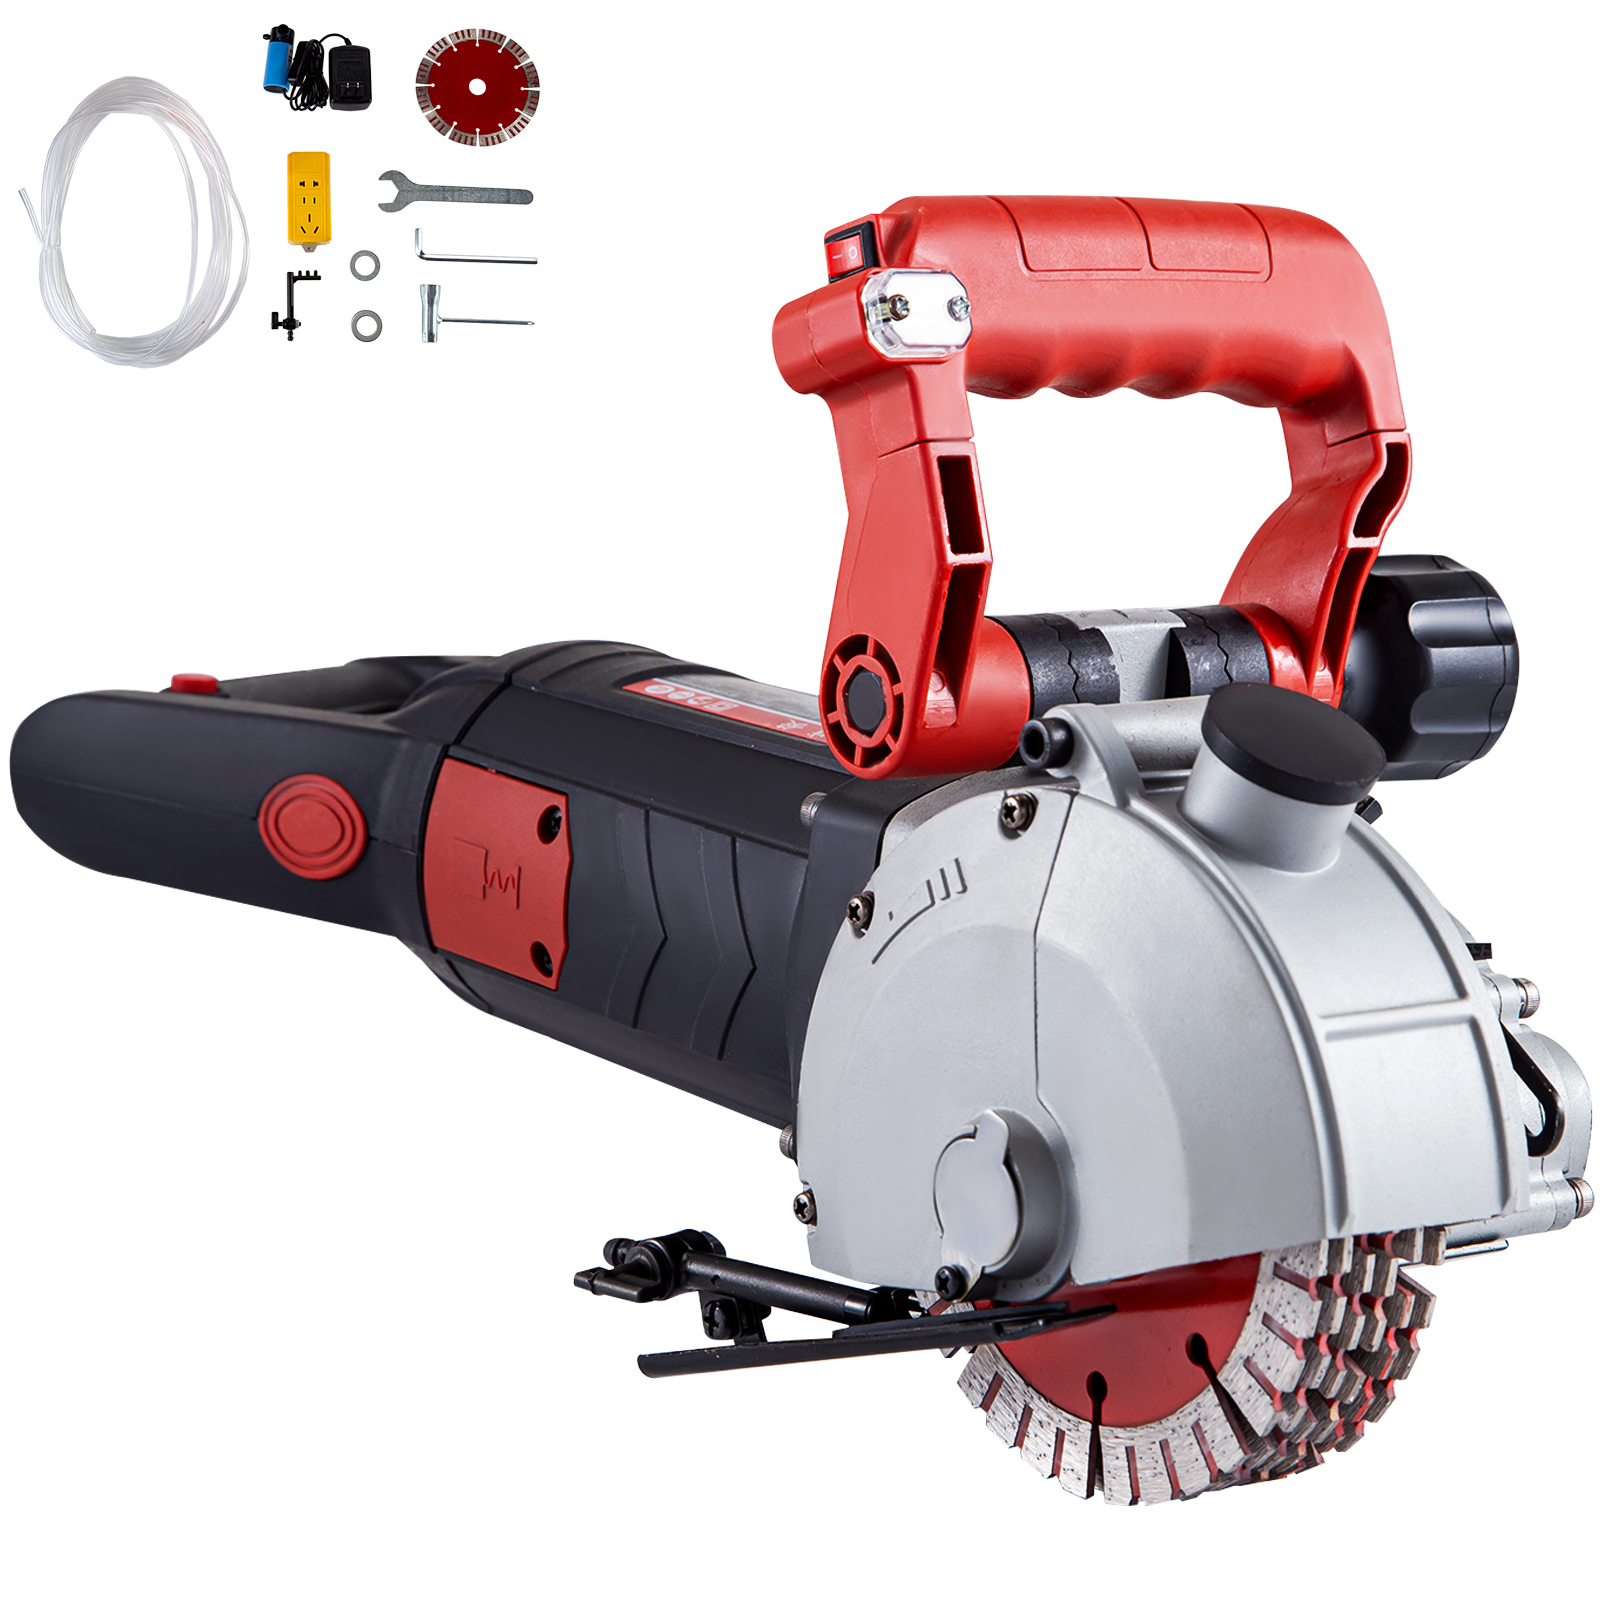 Wall Chaser,35 mm Depth,125 mm Saw Blades